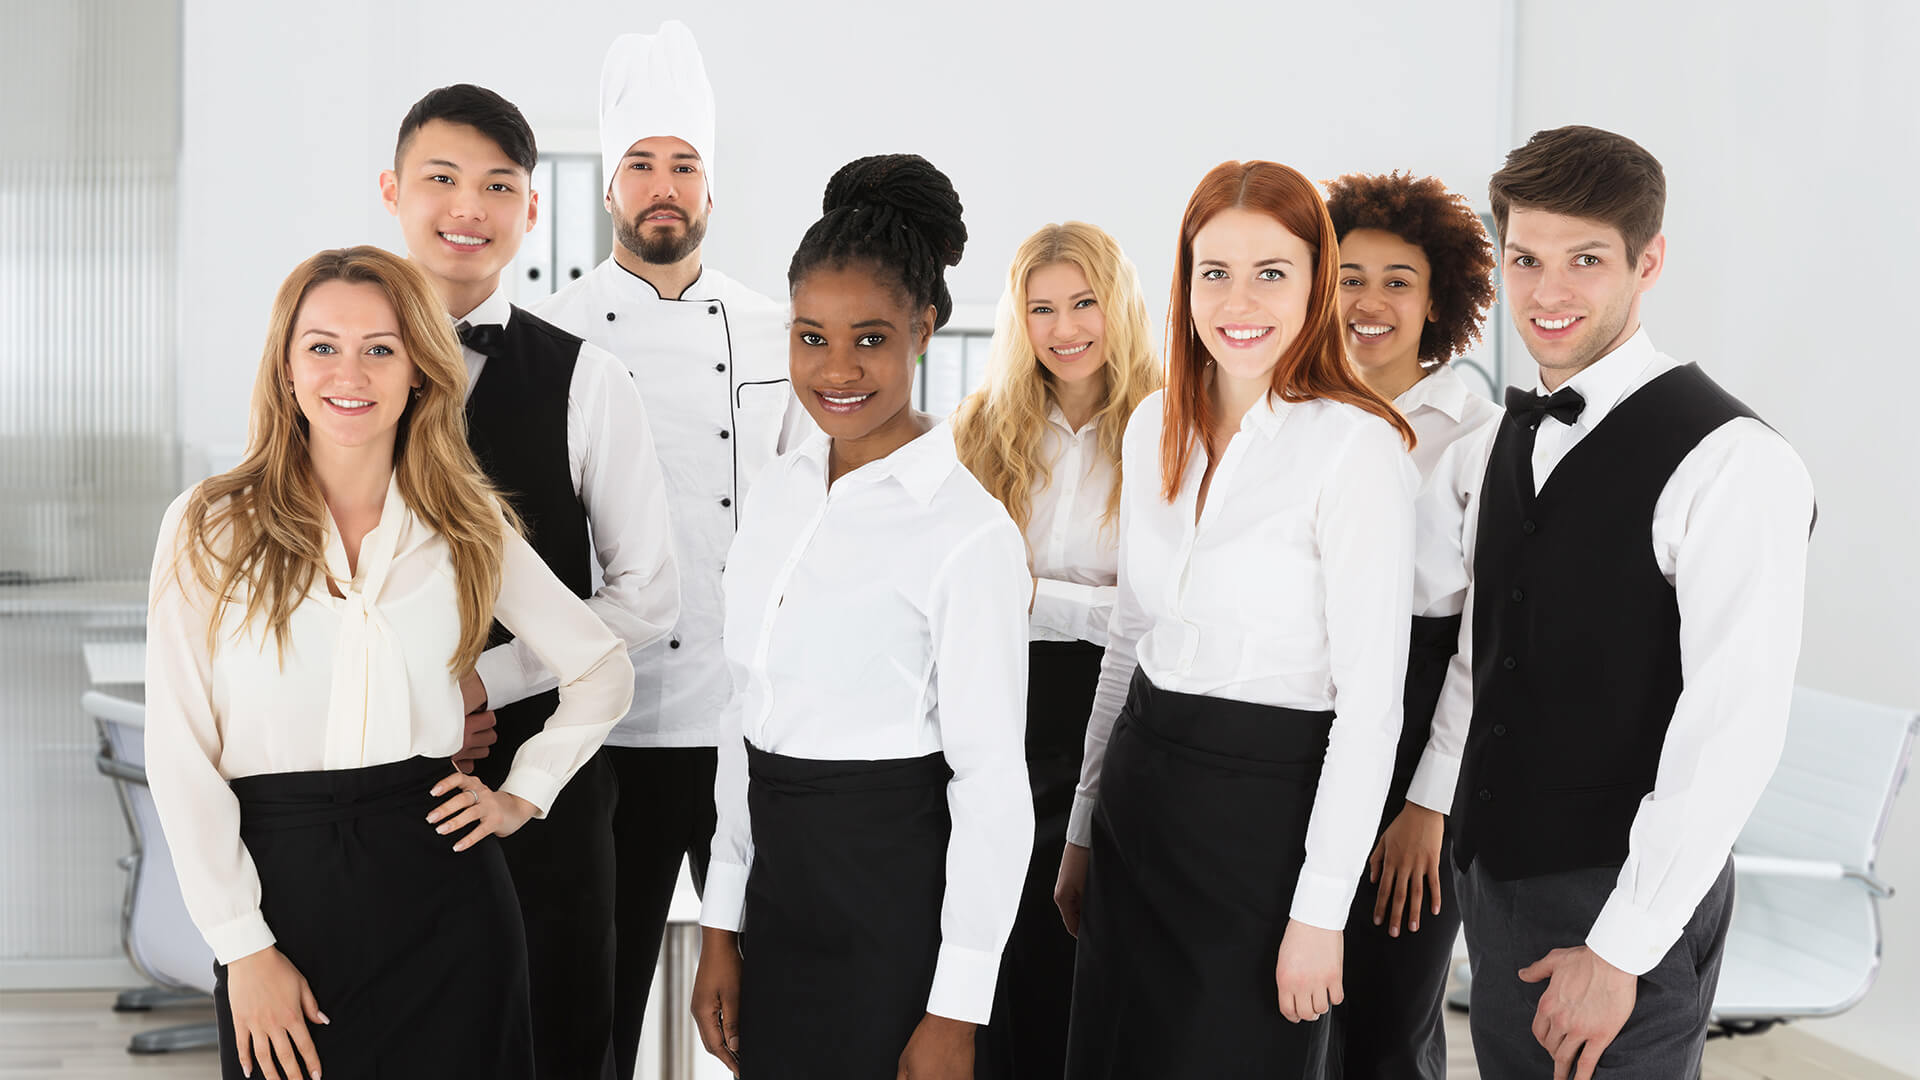 Restaurant employees including chefs and waiters in black and white uniforms